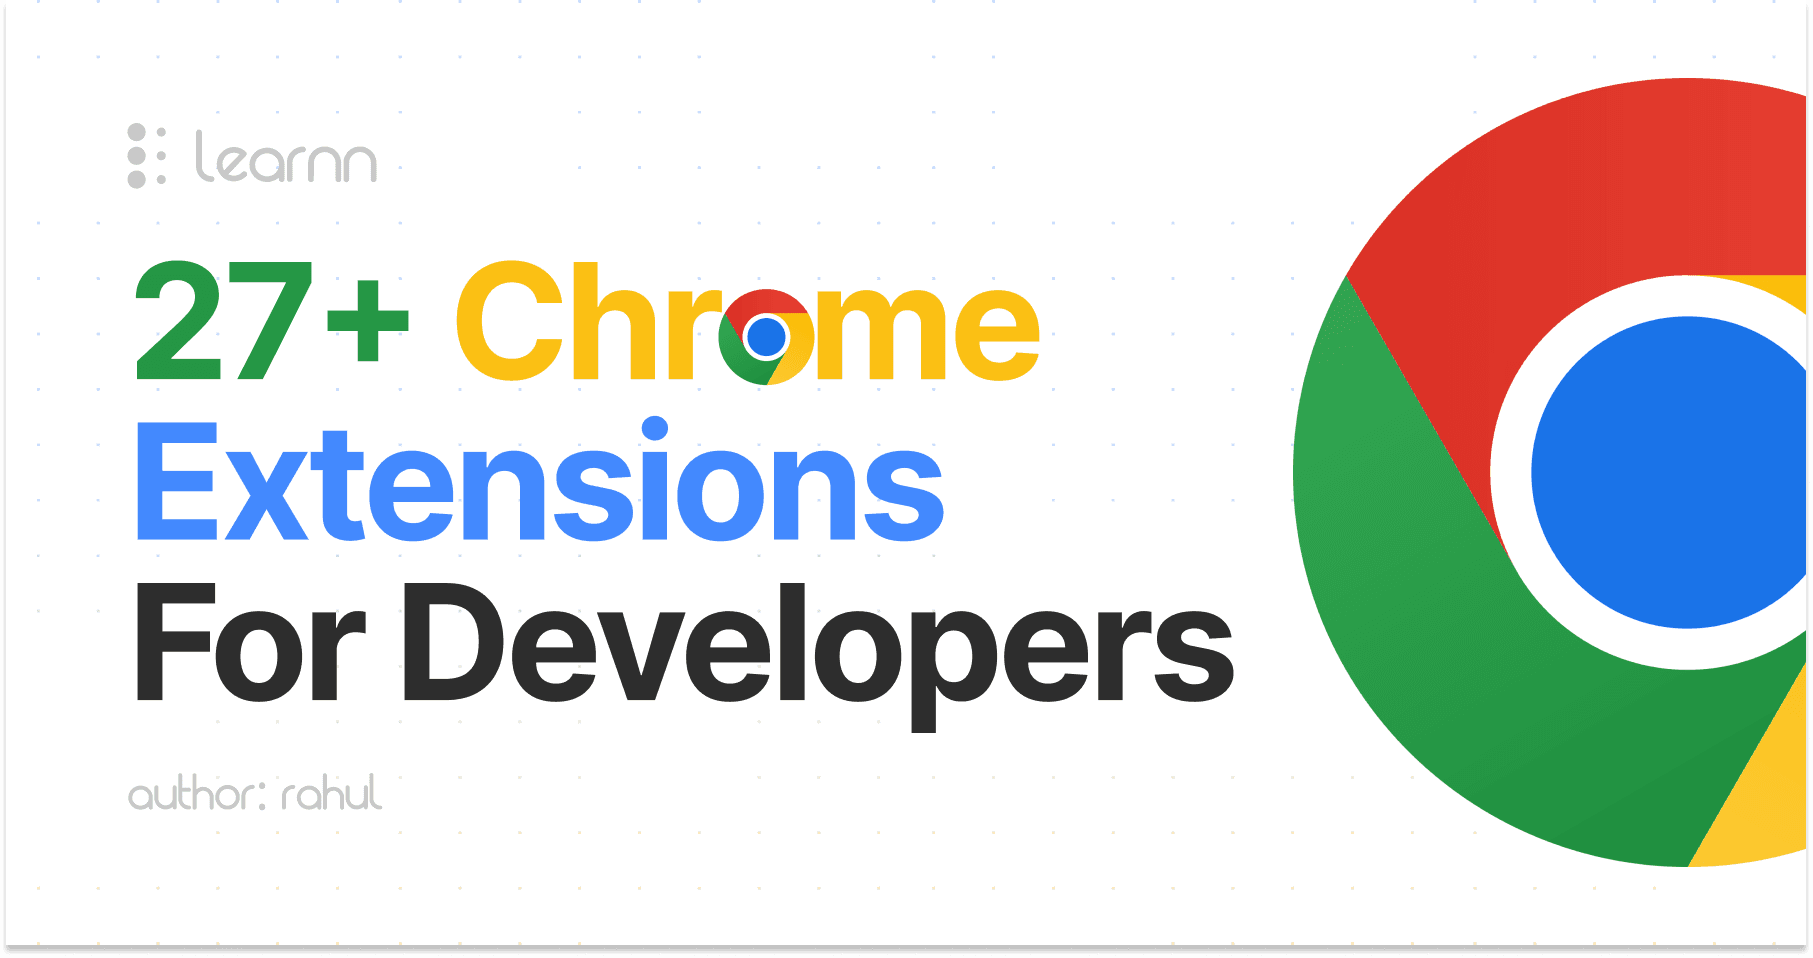 27+ Chrome Extensions Every Developer Should Have